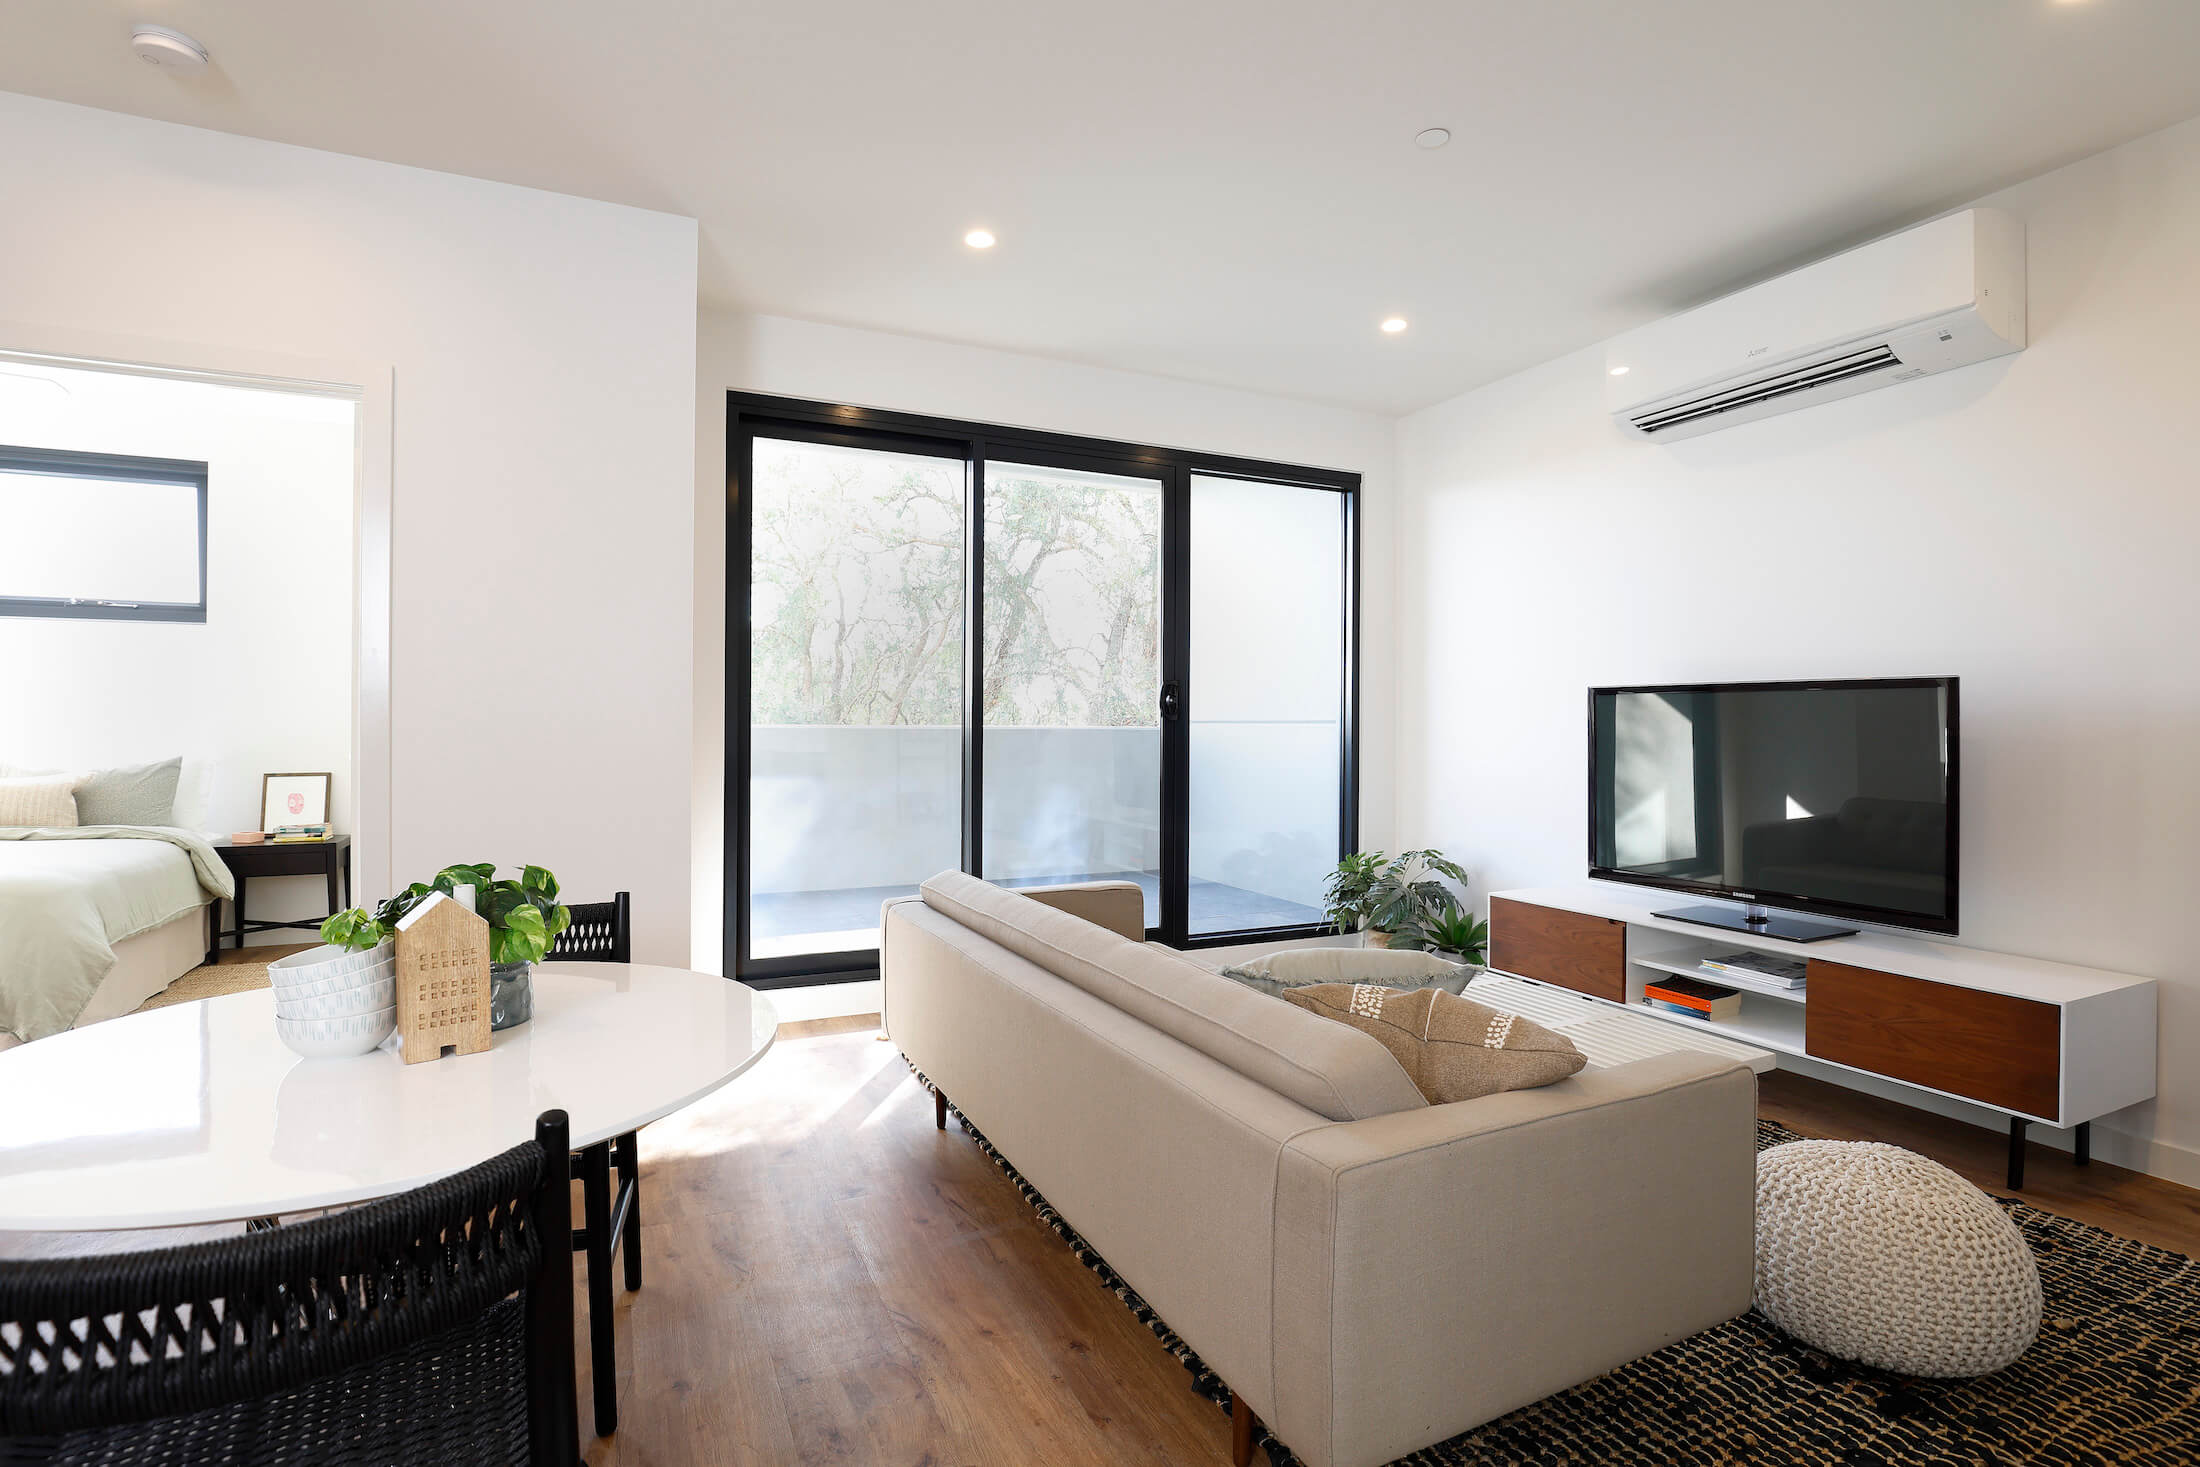 Bright living room space with white walls, timber-look flooring, balcony beyond